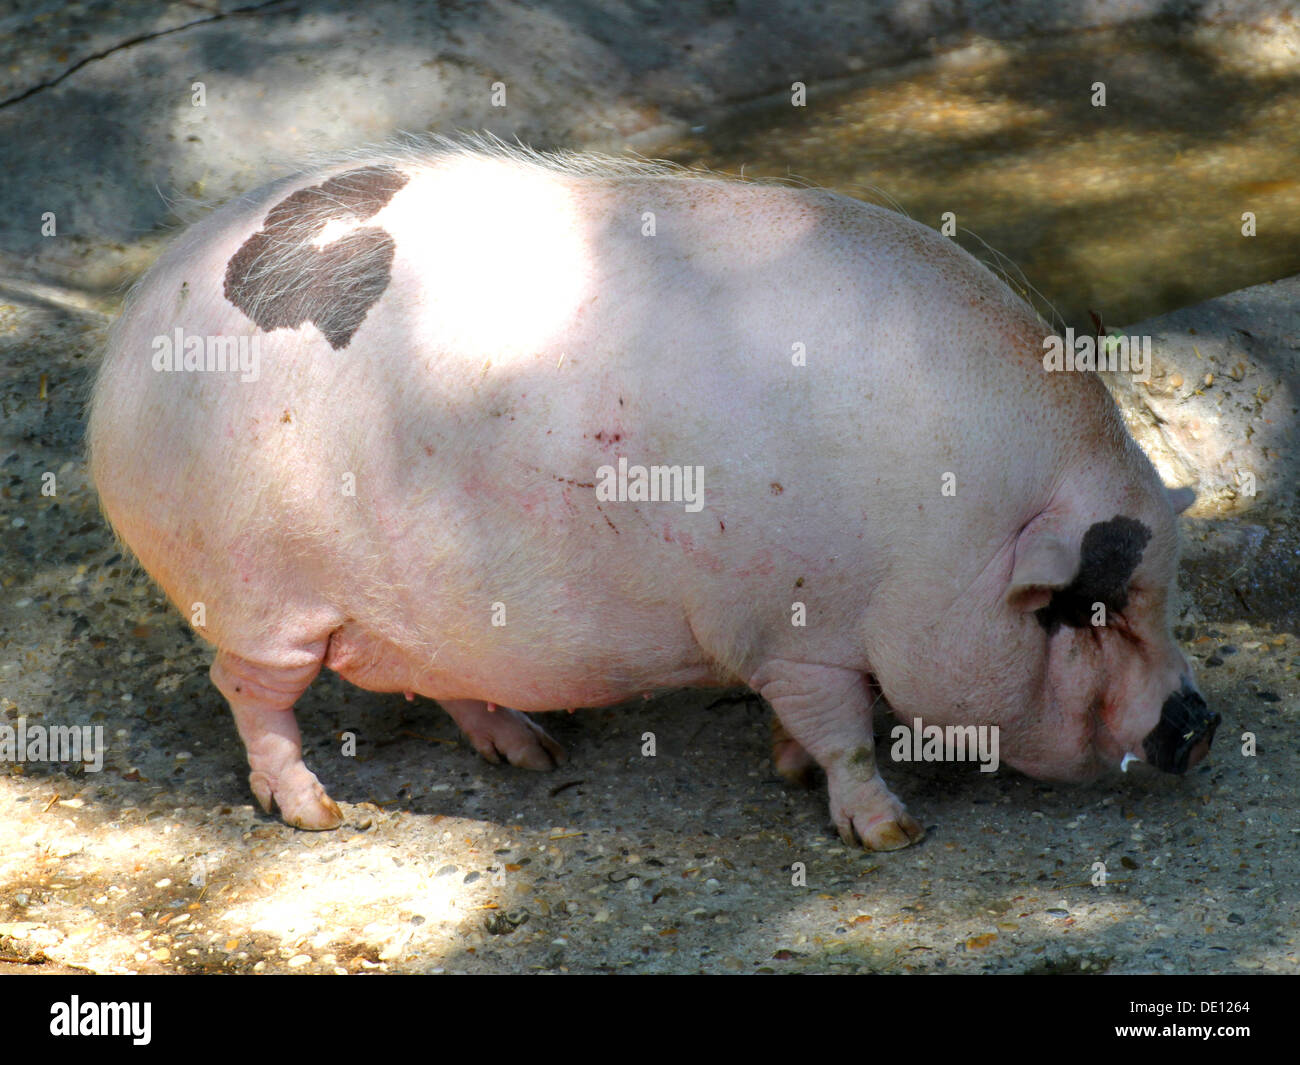 Pink pig fat rest with its huge grinding wheel inside the pigsty amid the mud Stock Photo